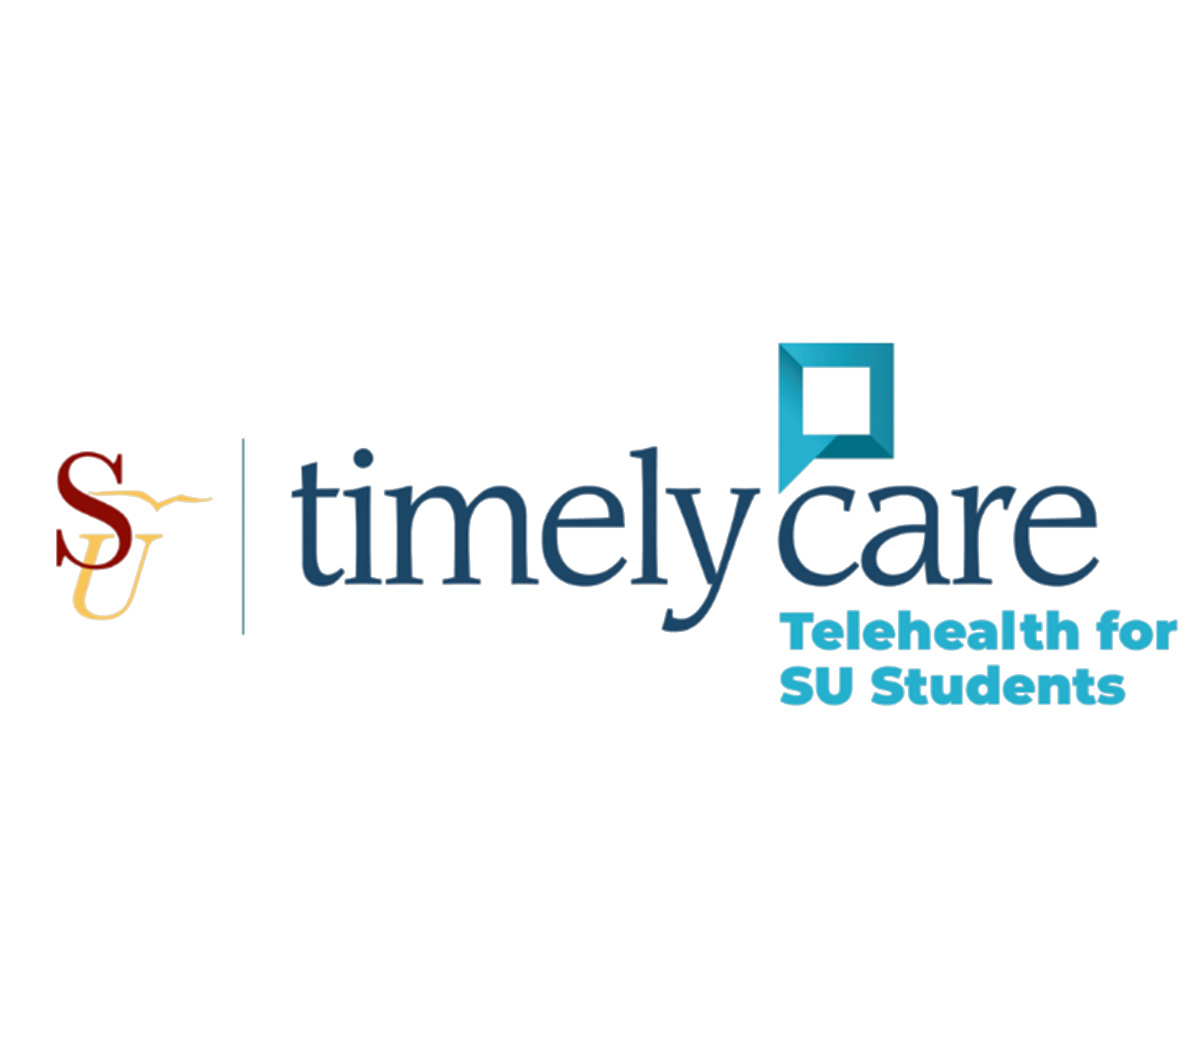 TimelyCare and SU logos